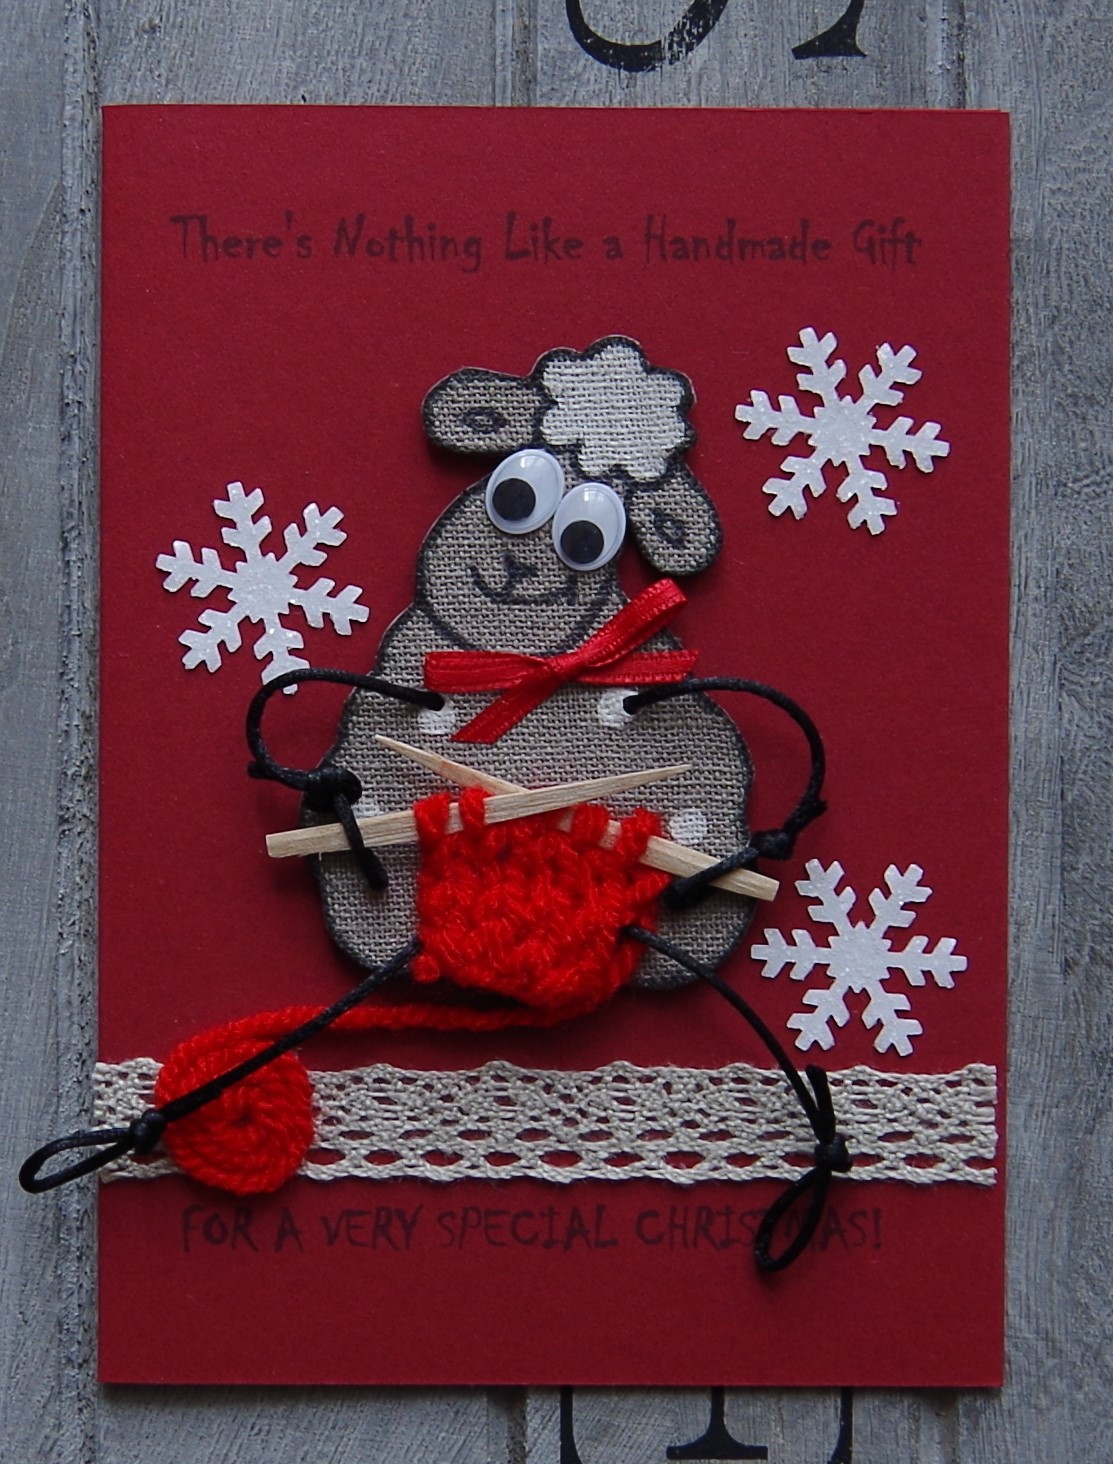 There's Nothing Like a Handmade Gift FOR A VERY SPECIAL CHRISTMAS!